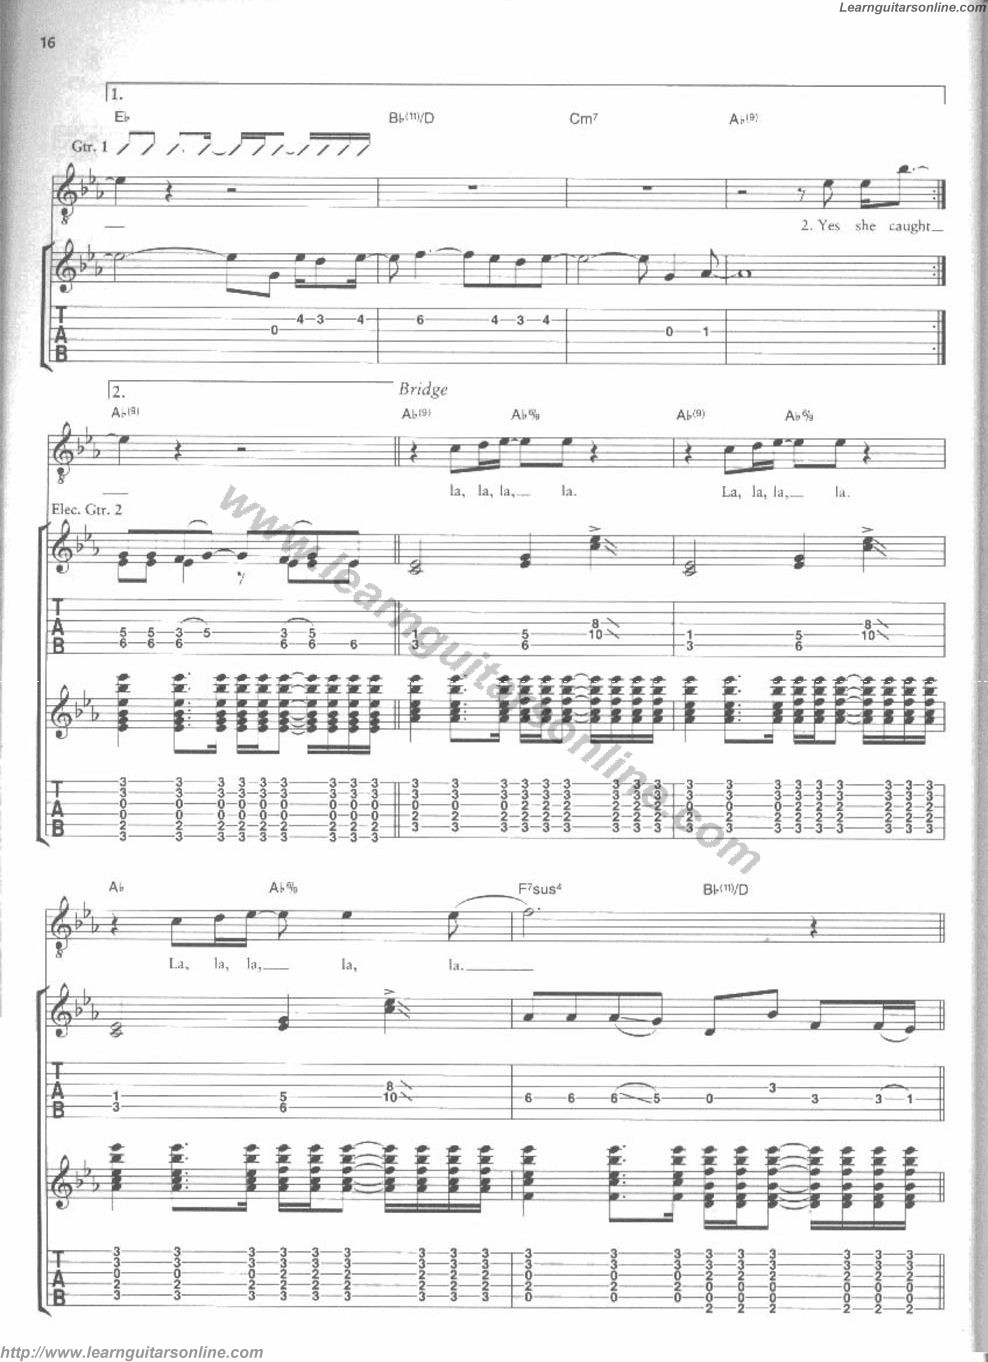 You are beautiful by James Blunt Guitar Sheet Music Free